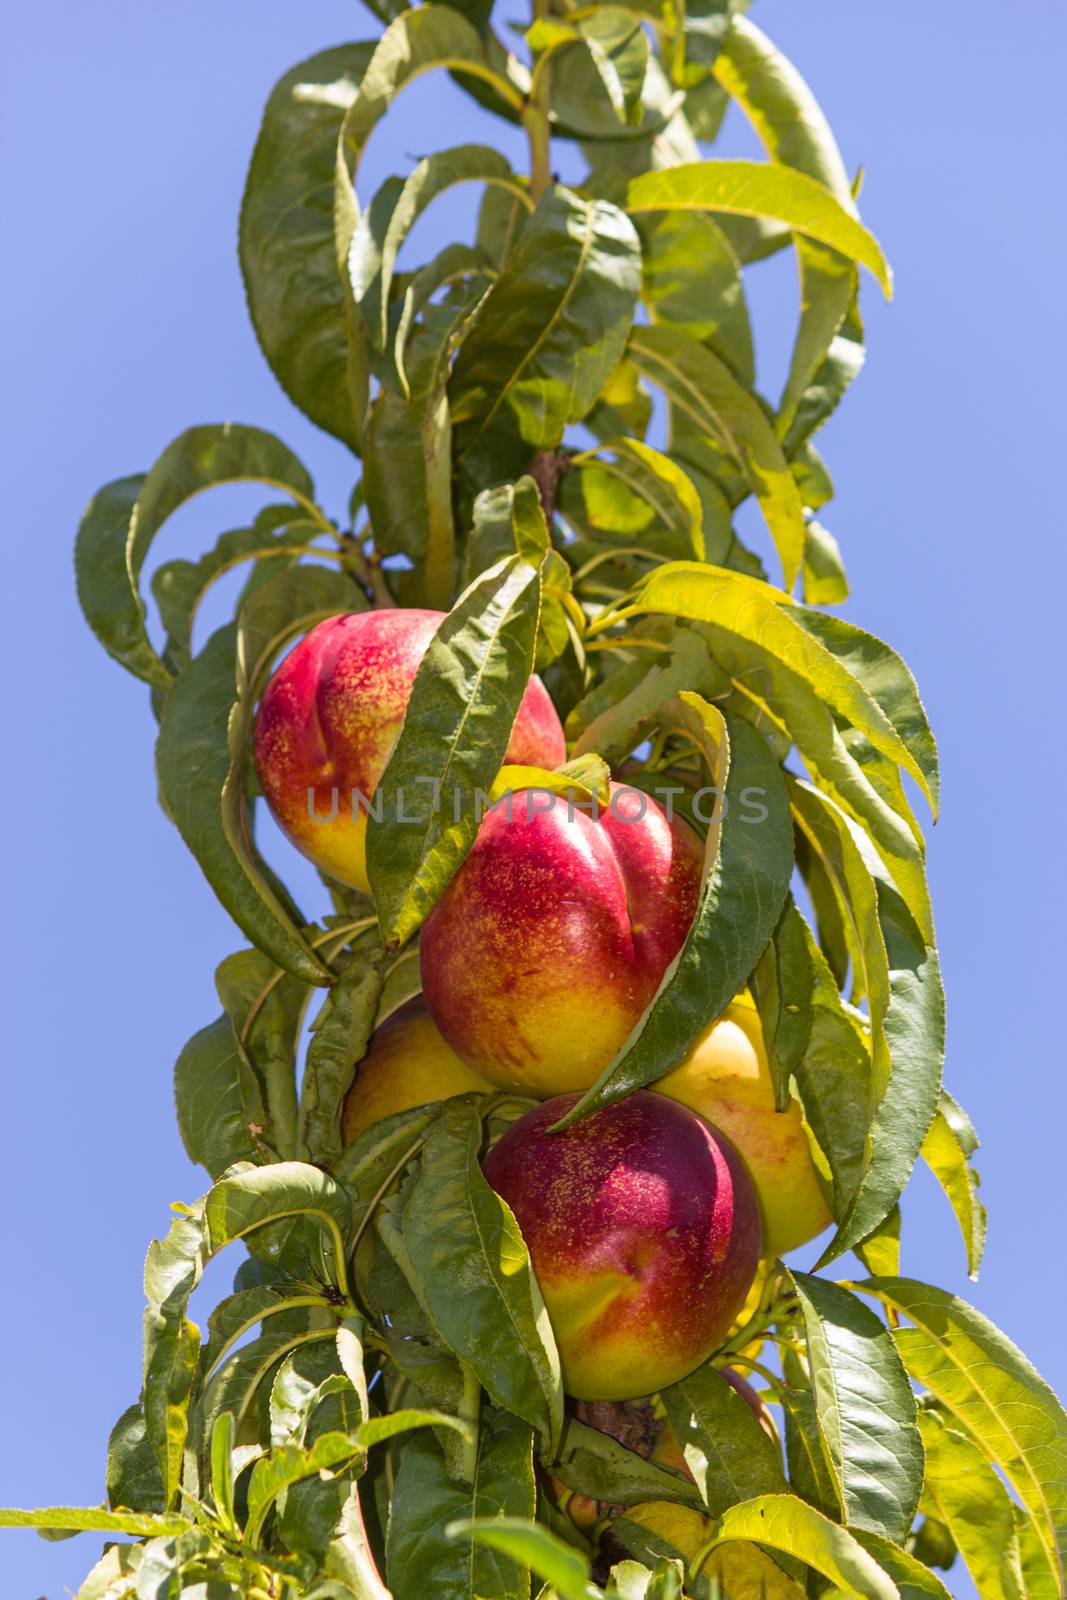 The sun-ripened peaches from Sicily